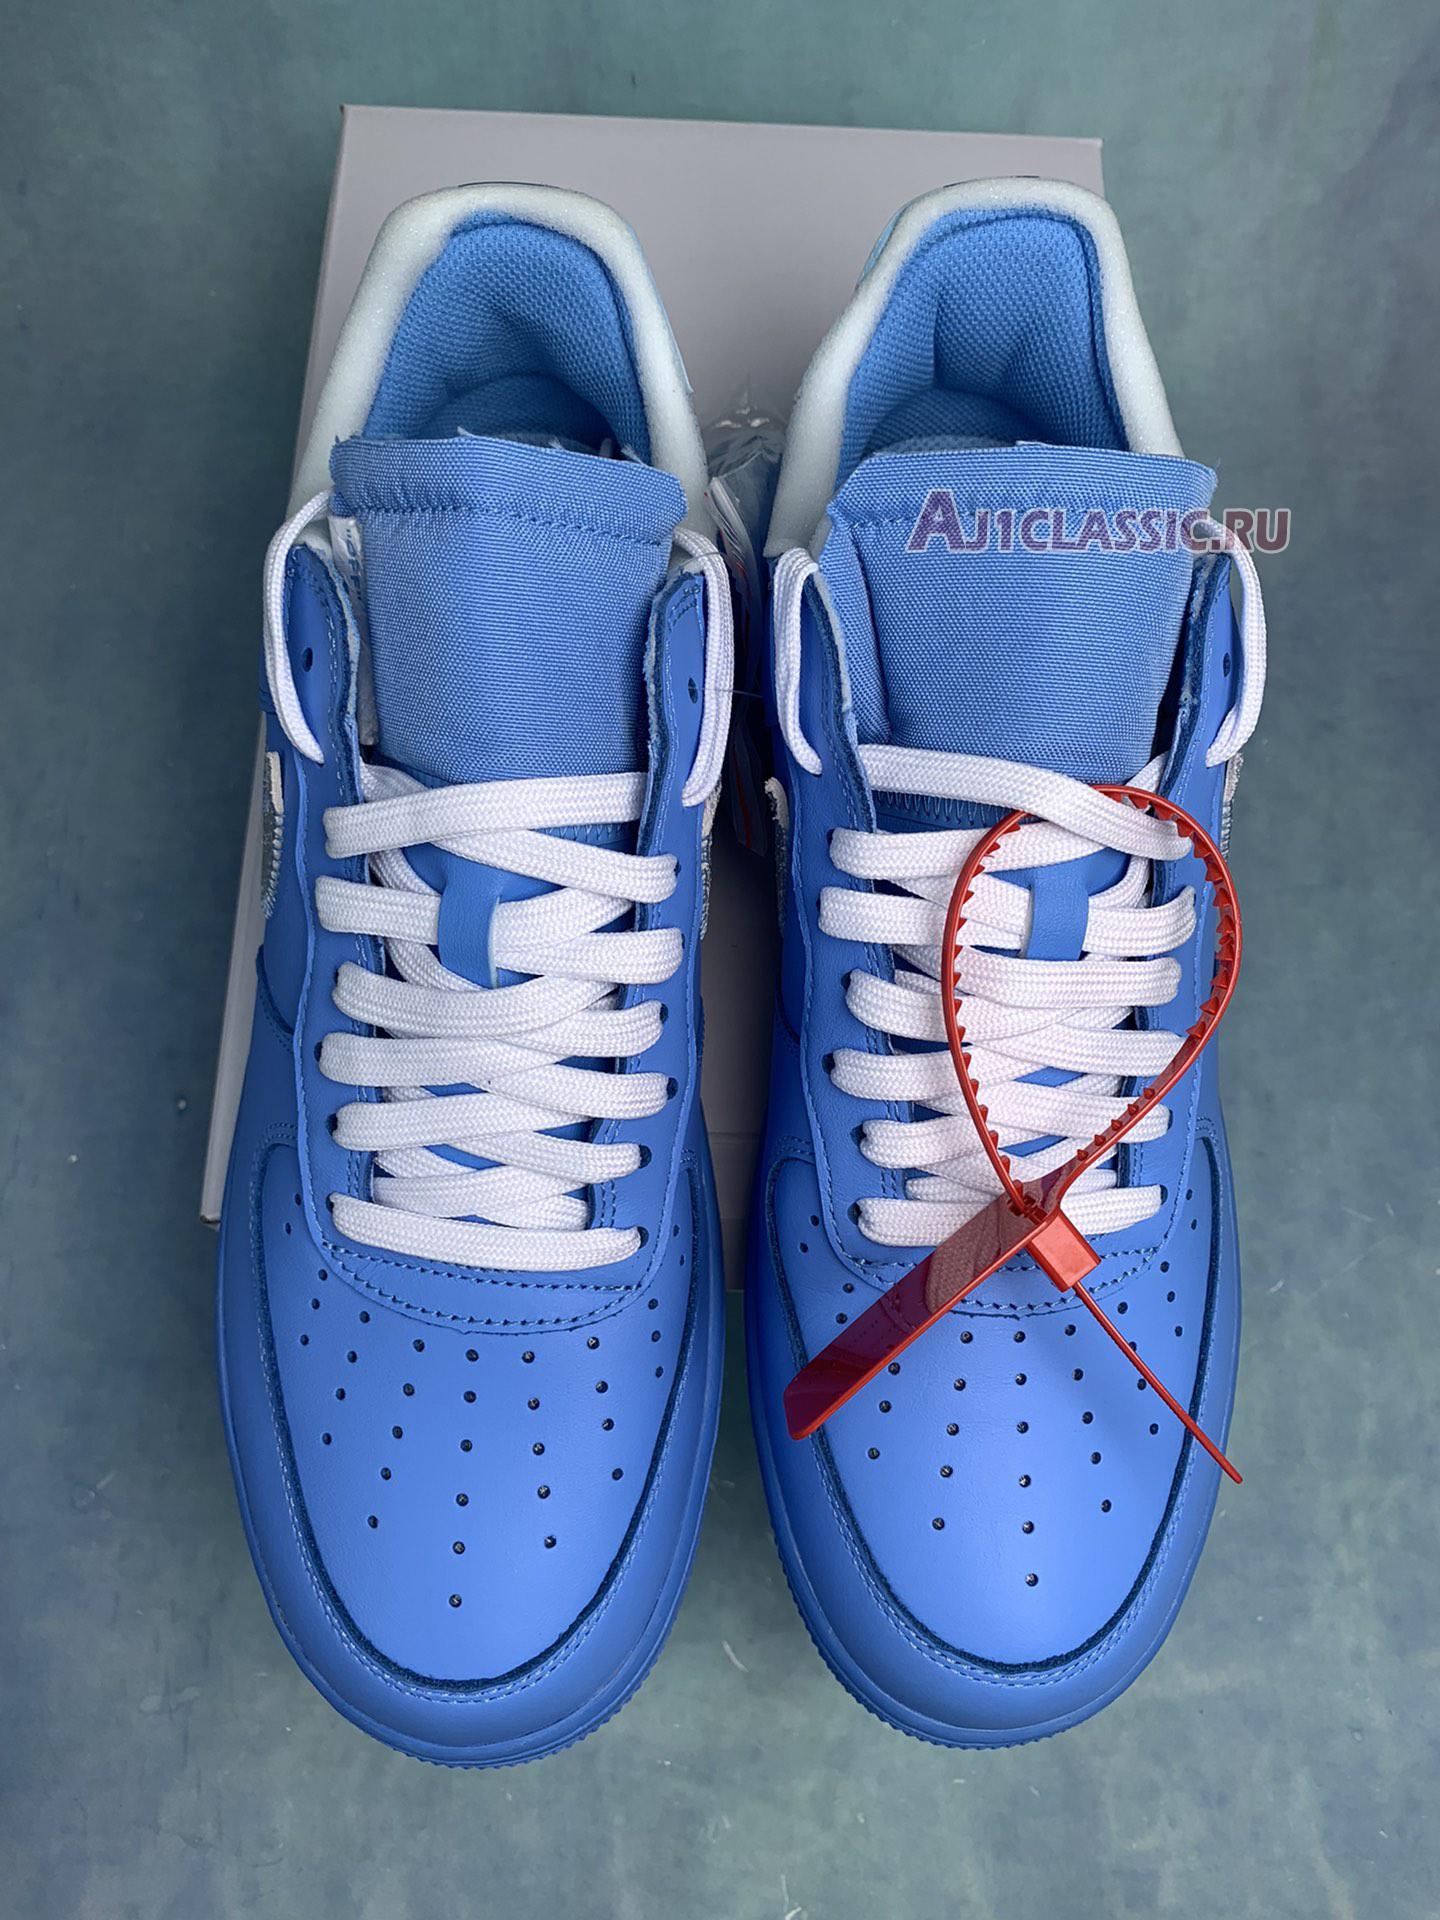 Off-White x Air Force 1 Low 07 "MCA" CI1173-400-2